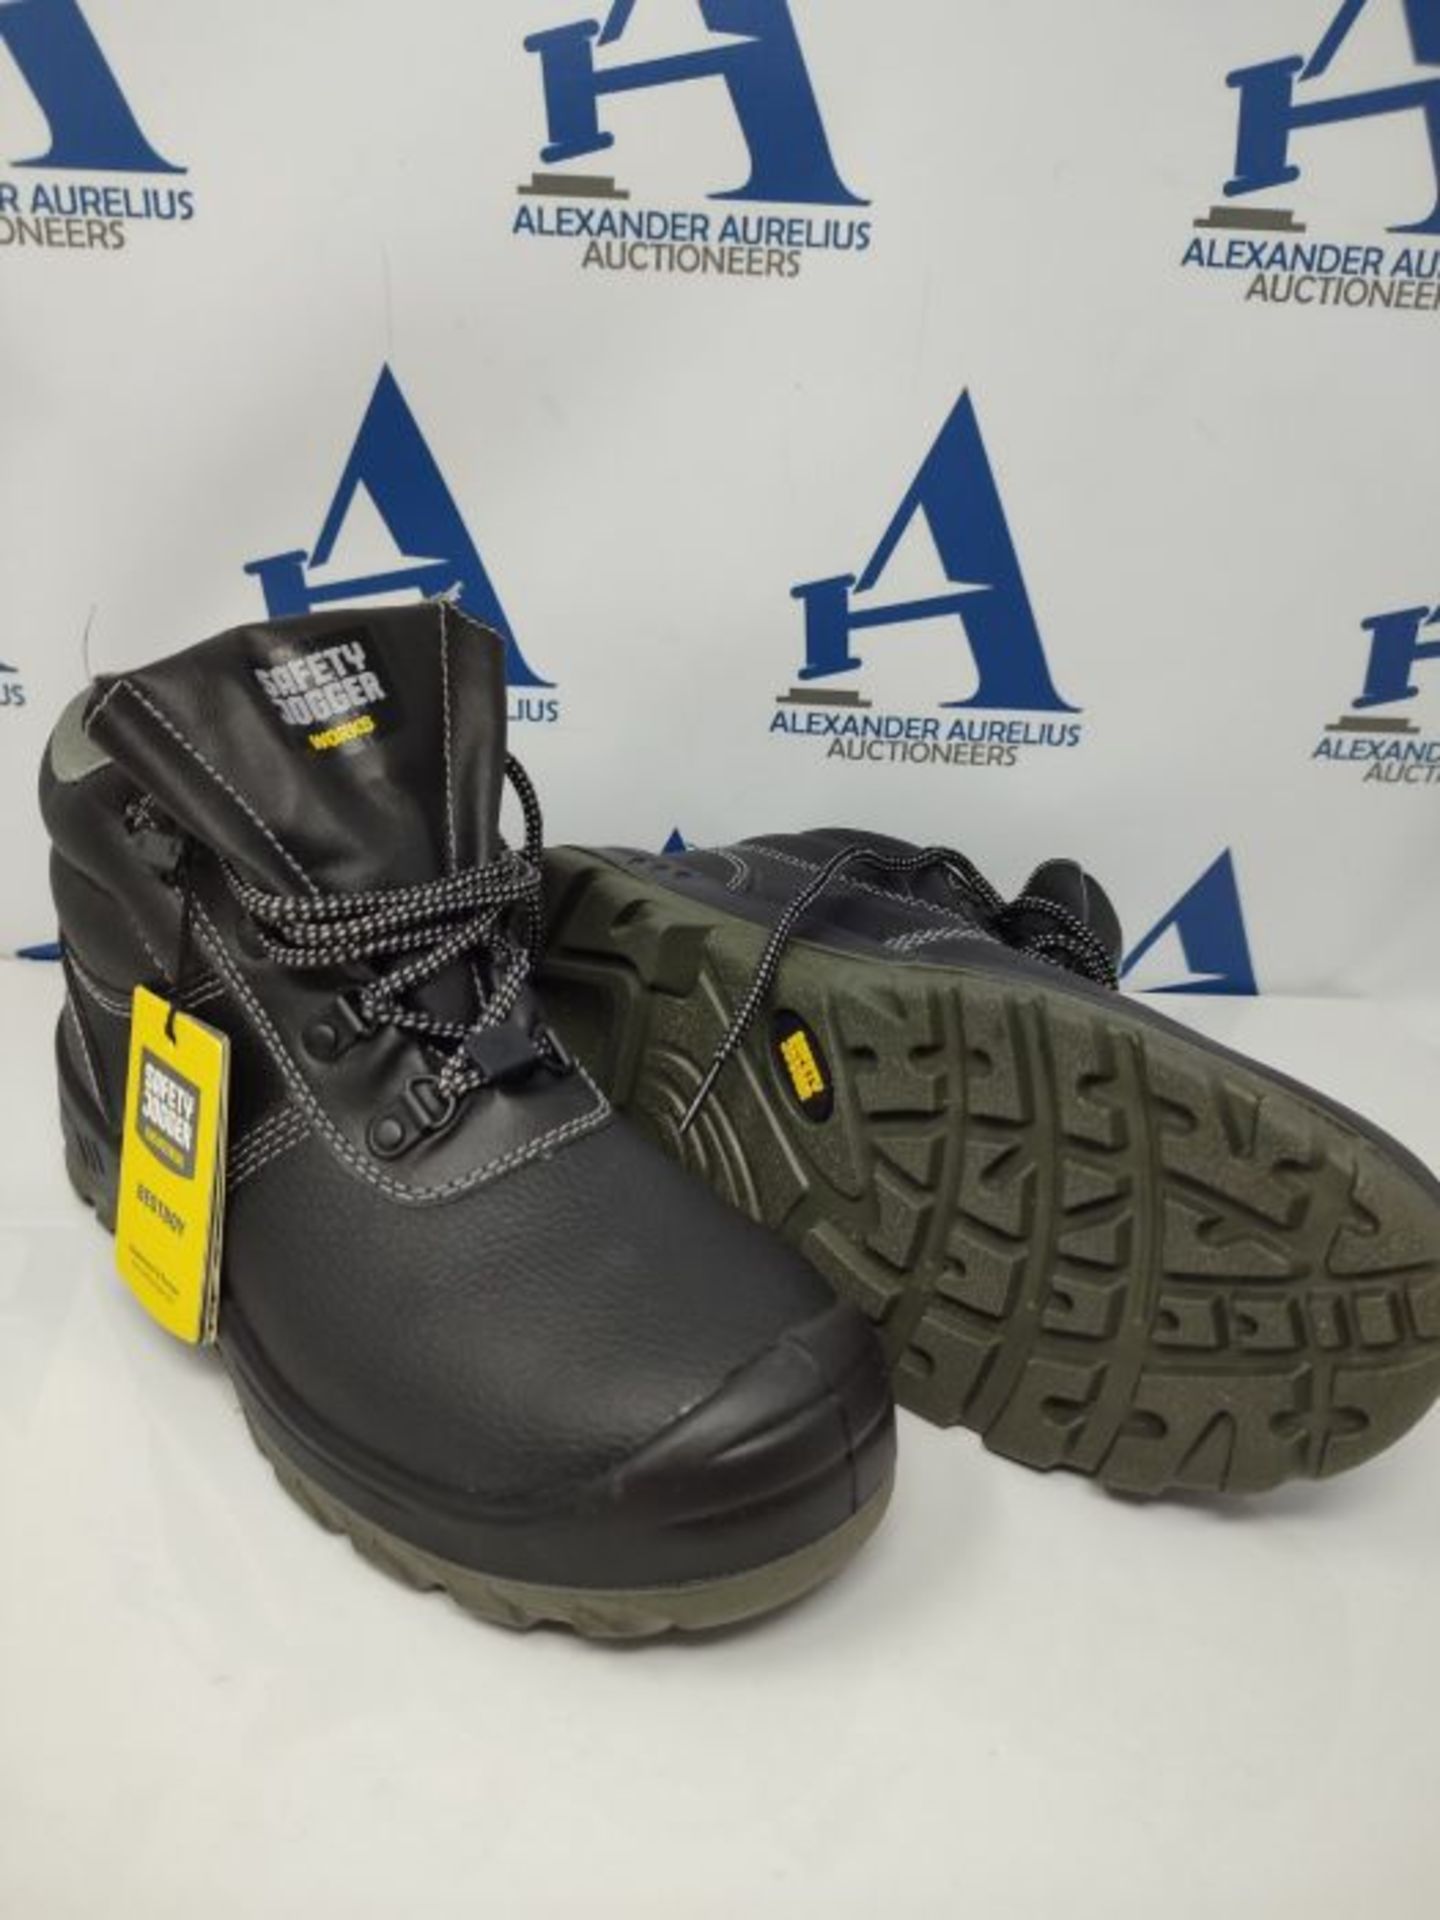 SAFETY JOGGER Safety Boot - BESTBOY - Steel Toe Cap S3/S1P Work Shoe for Men or Women, - Image 3 of 3